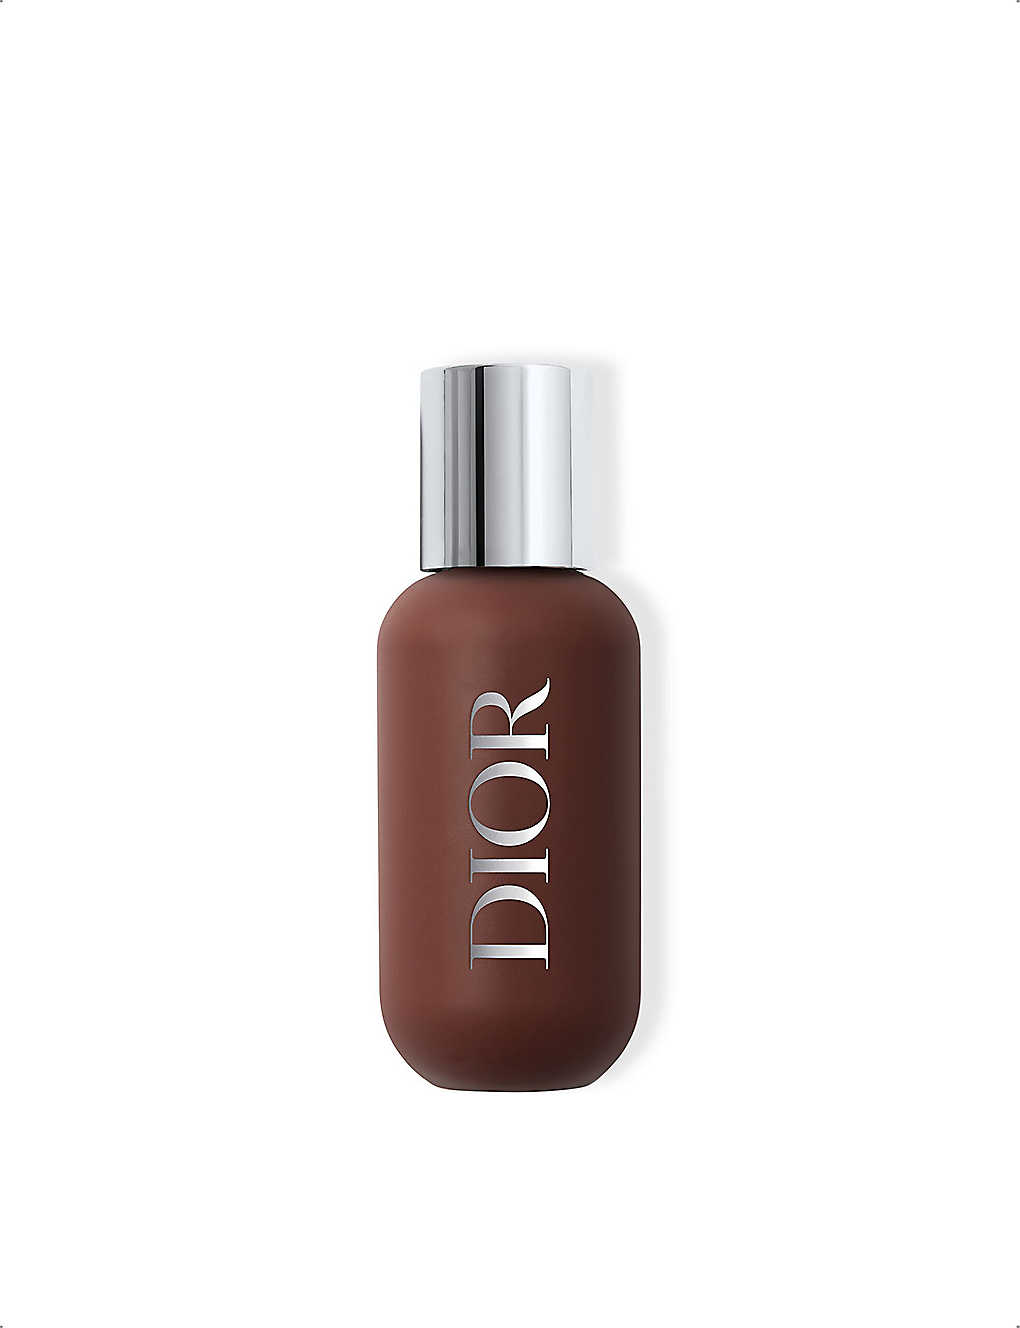 Dior Nude (lingerie) Backstage Face & Body Foundation 50ml In 9n